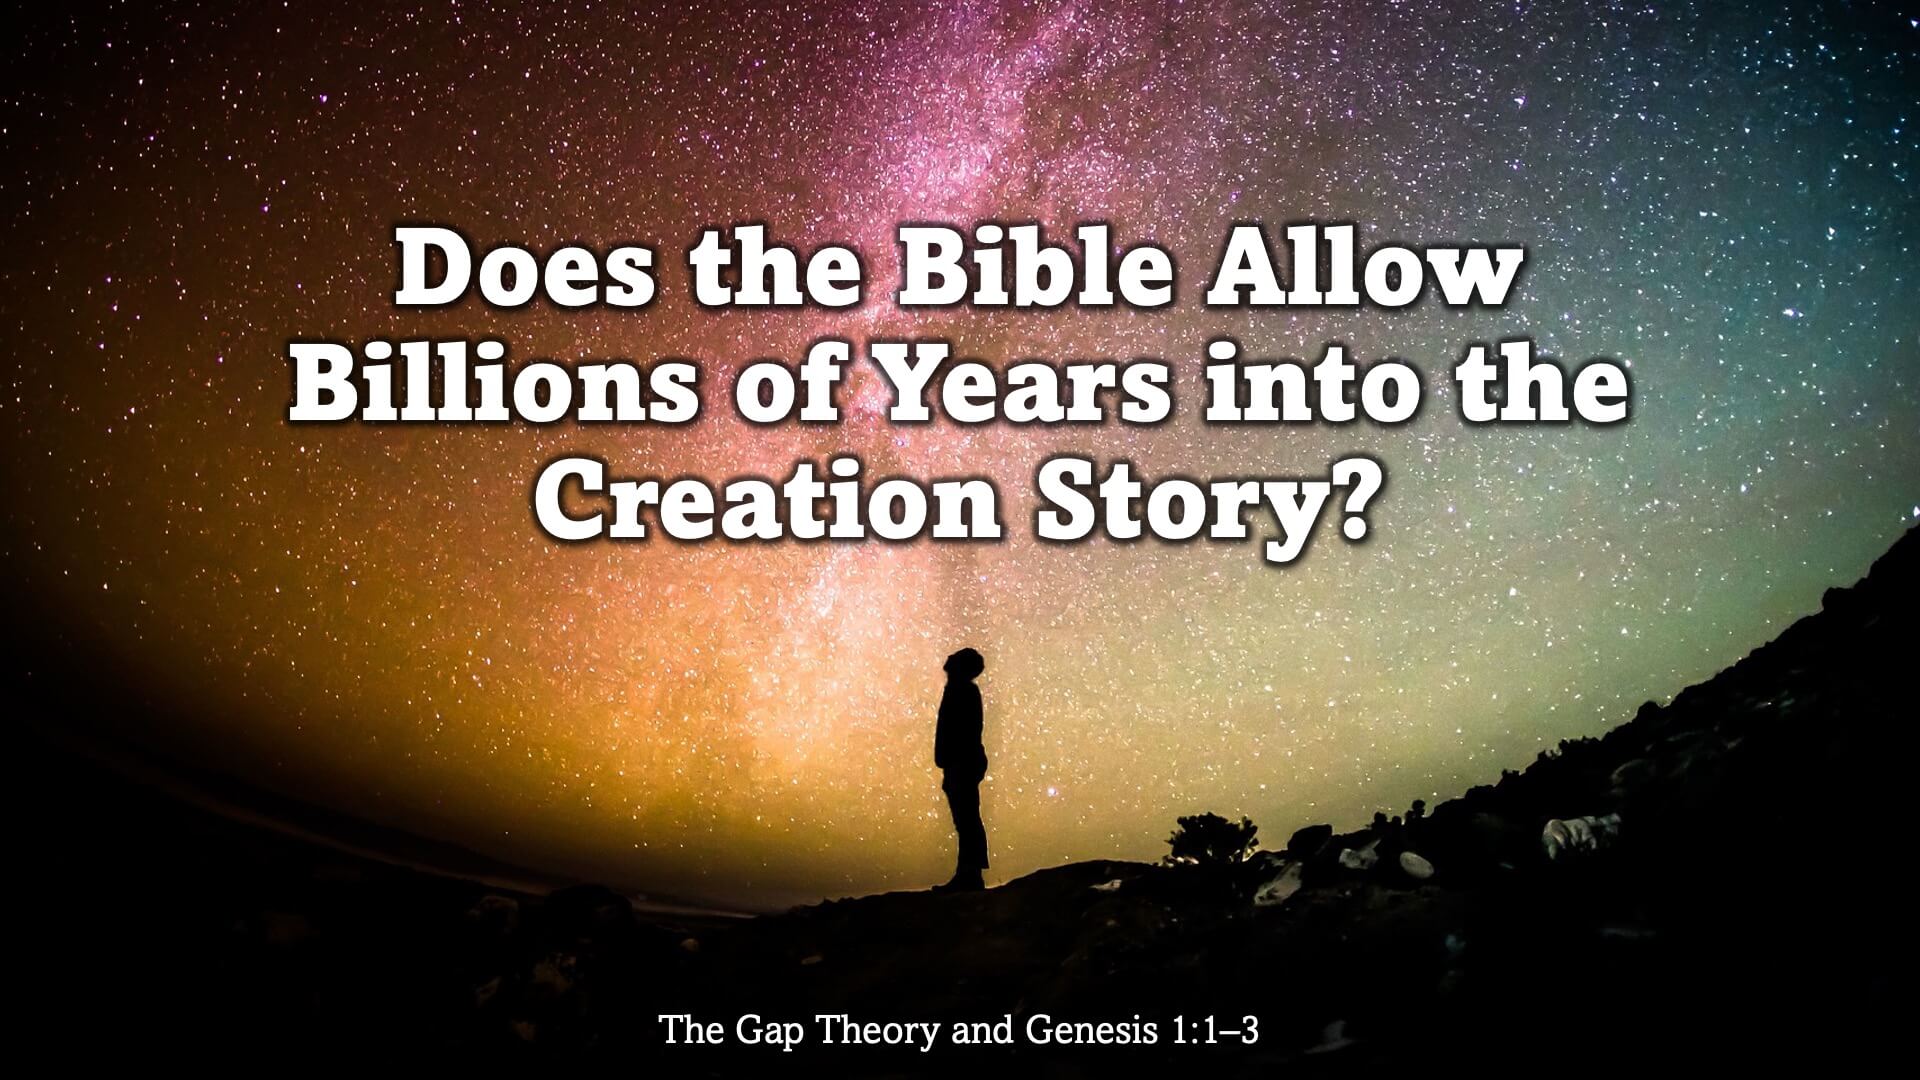 Does the Bible Allow Billions of Years into the Creation Story?